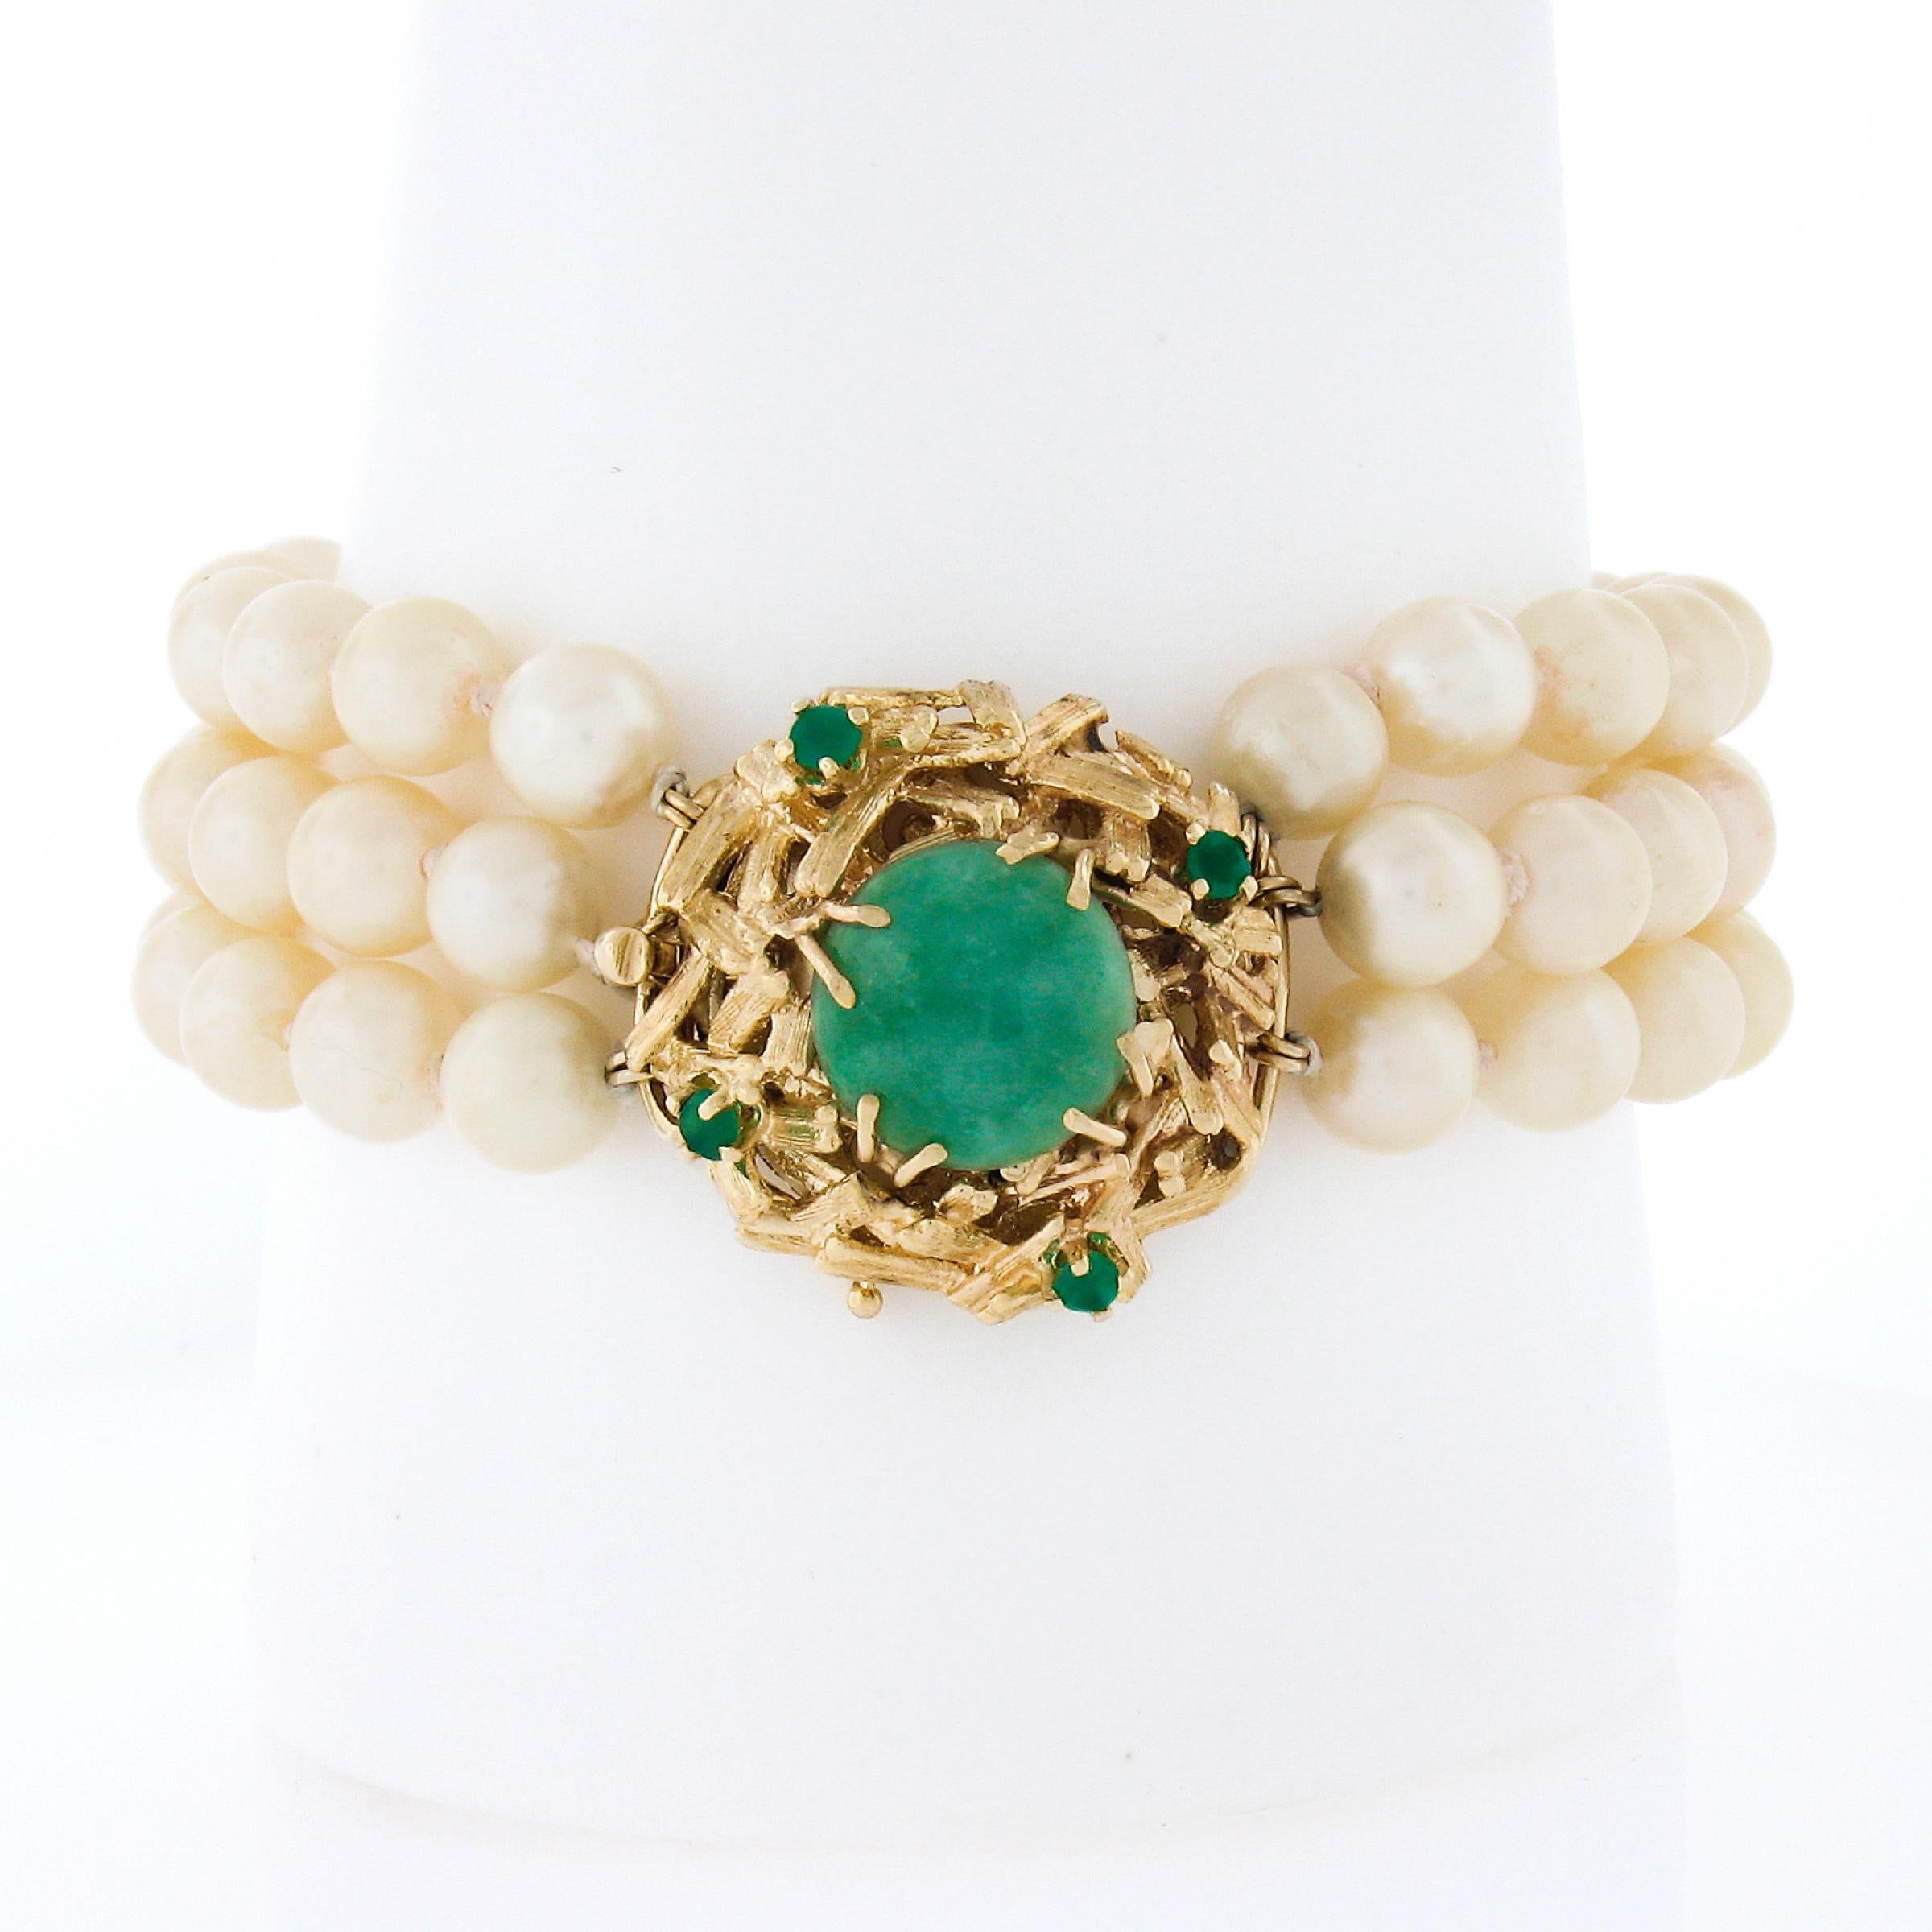 This gorgeous vintage bracelet is constructed from 3 rows of nice quality round cultured pearls that are neatly strung throughout with a fancy clasp and bar spacers crafted from solid 14k yellow gold. These beautiful pearls are well matched in size